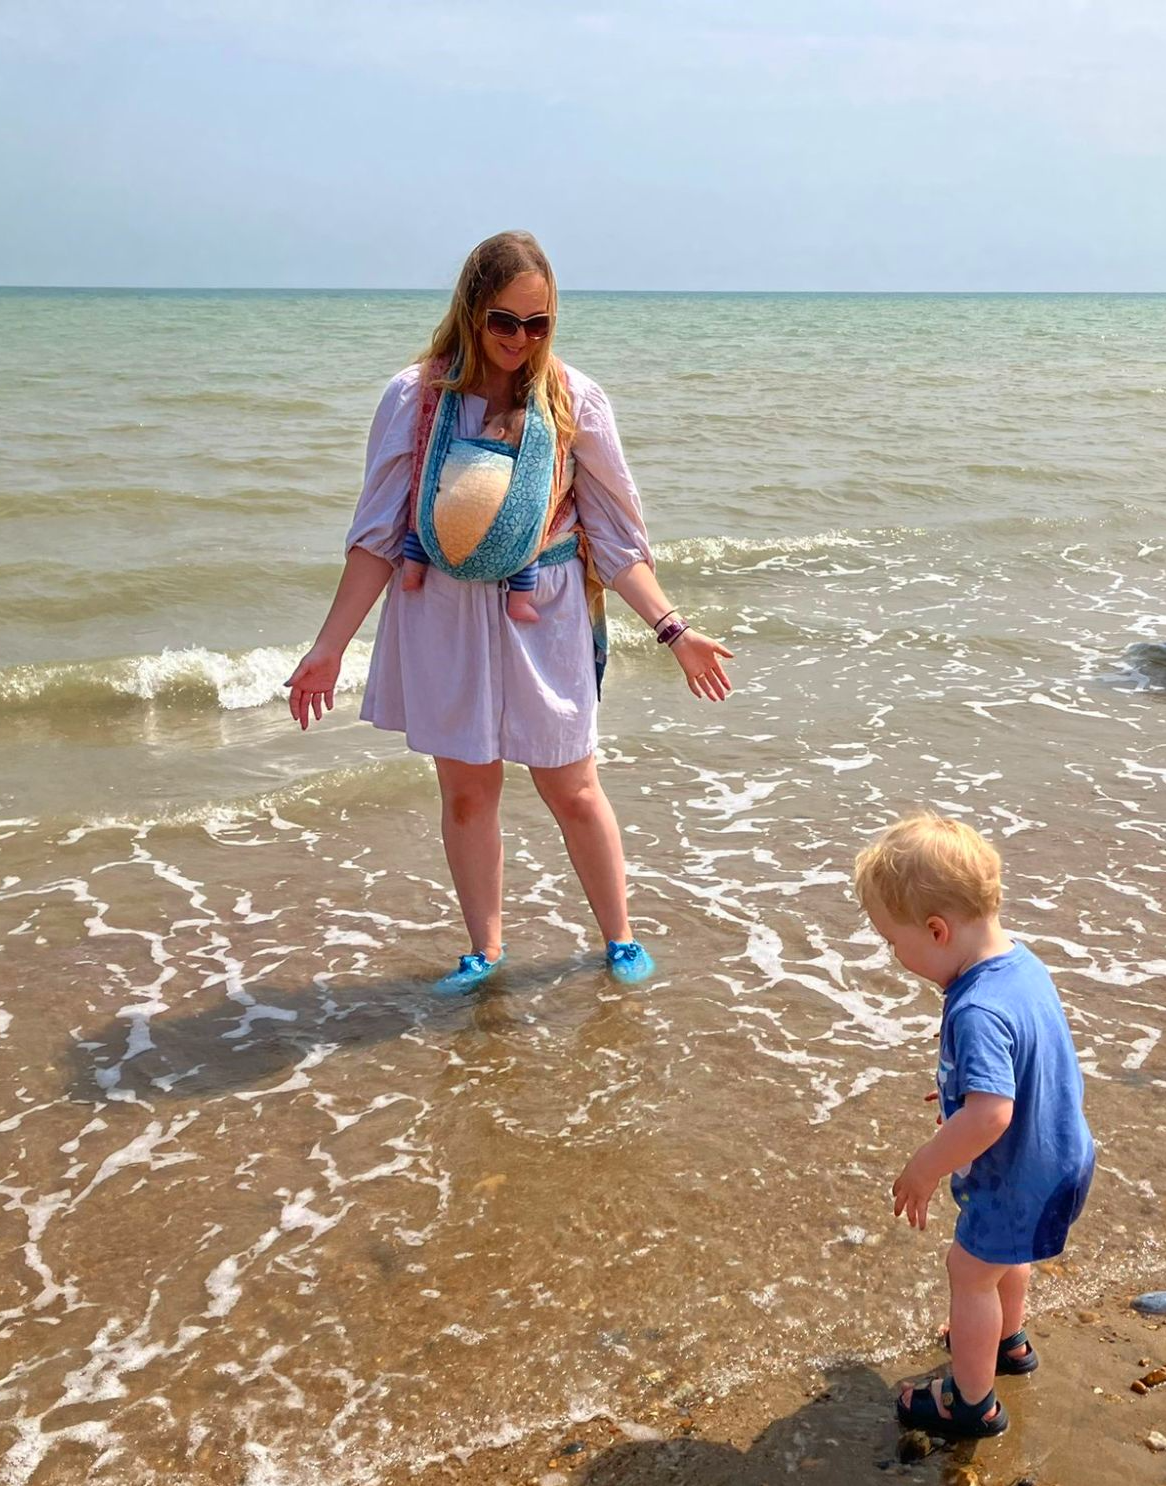 the hypnobirthing teacher with her two children - she is standing in shallow water at the sea with the baby wrapped in a colourful sling on her chest, while her toddler stands in front of her, looking for pebbles in the sea